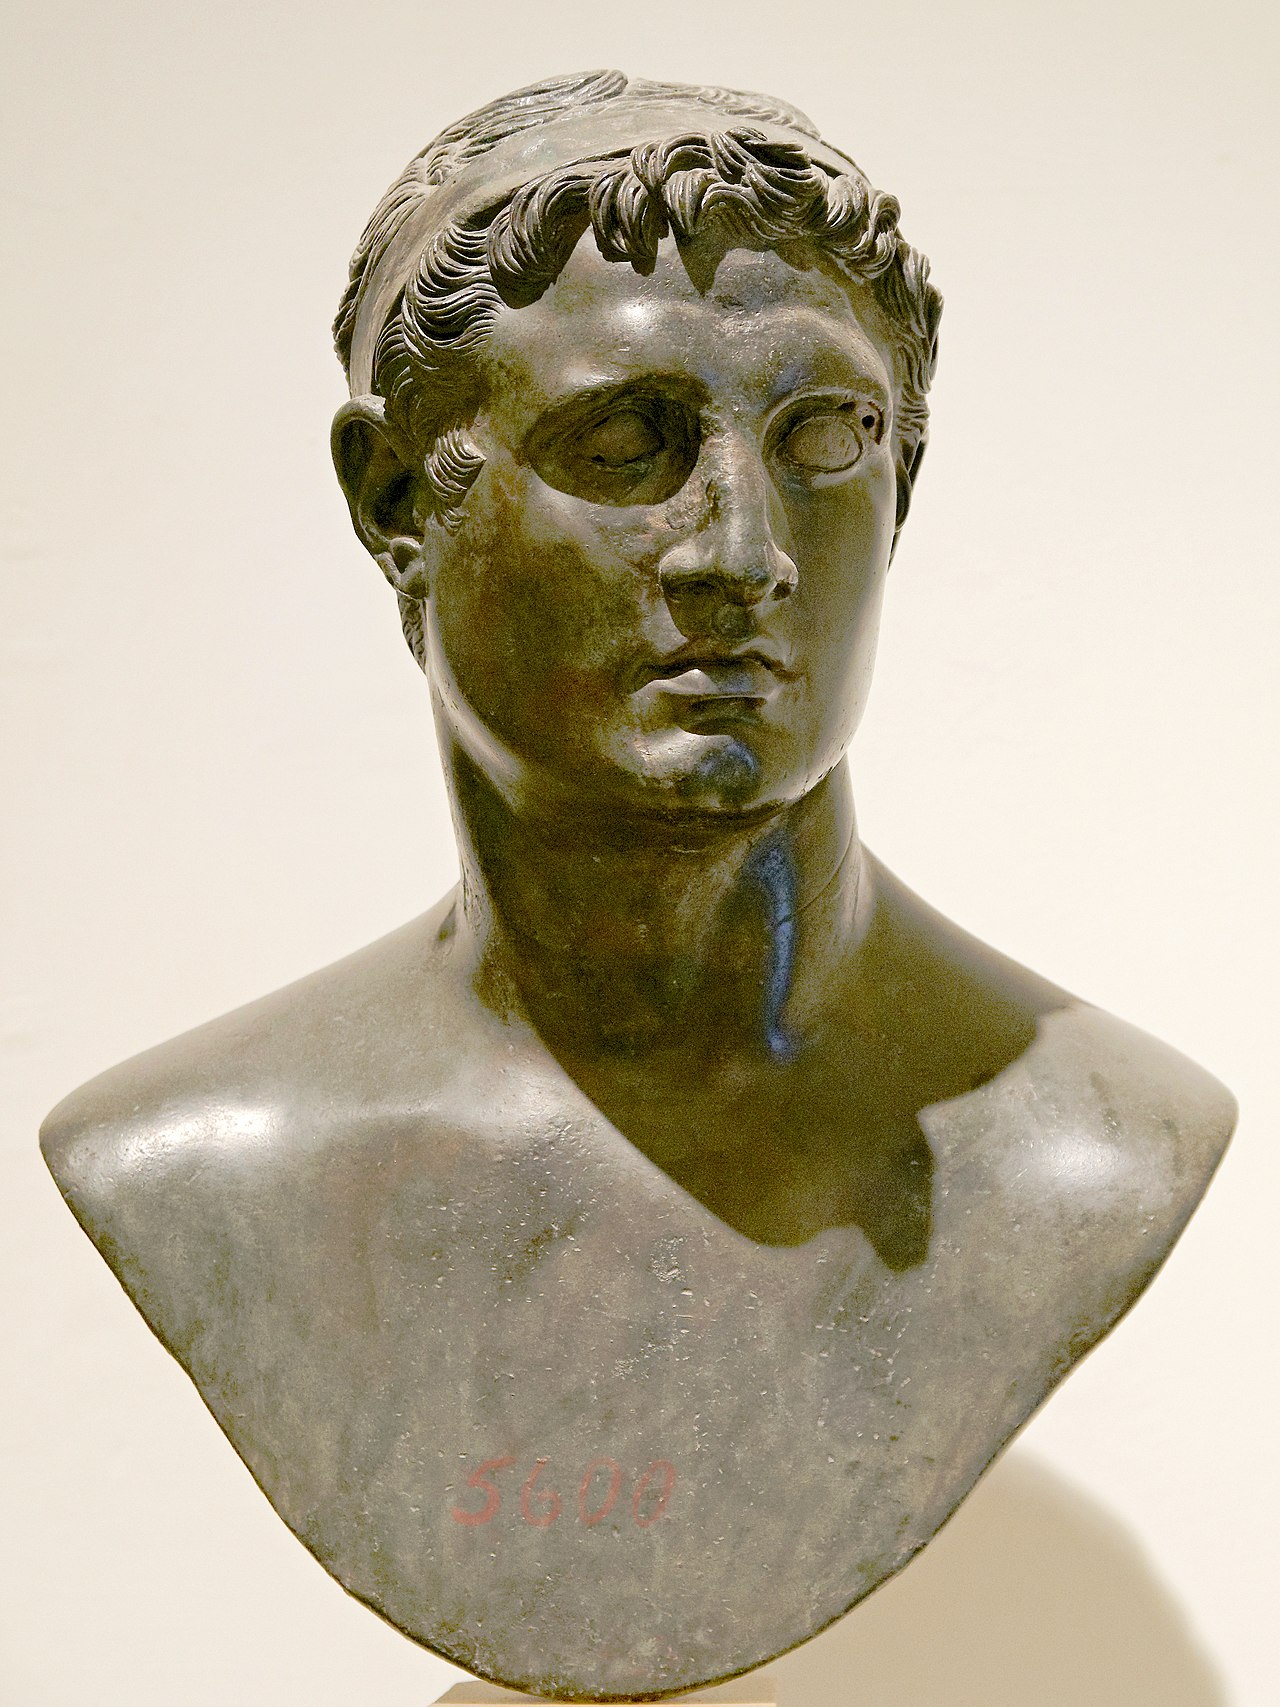 Bust excavated at the Villa of the Papyri depicting Ptolemy II Philadelphus, who is believed to have been the one to establish the Library as an actual institution, although plans for it may have been developed by his father Ptolemy I Soter